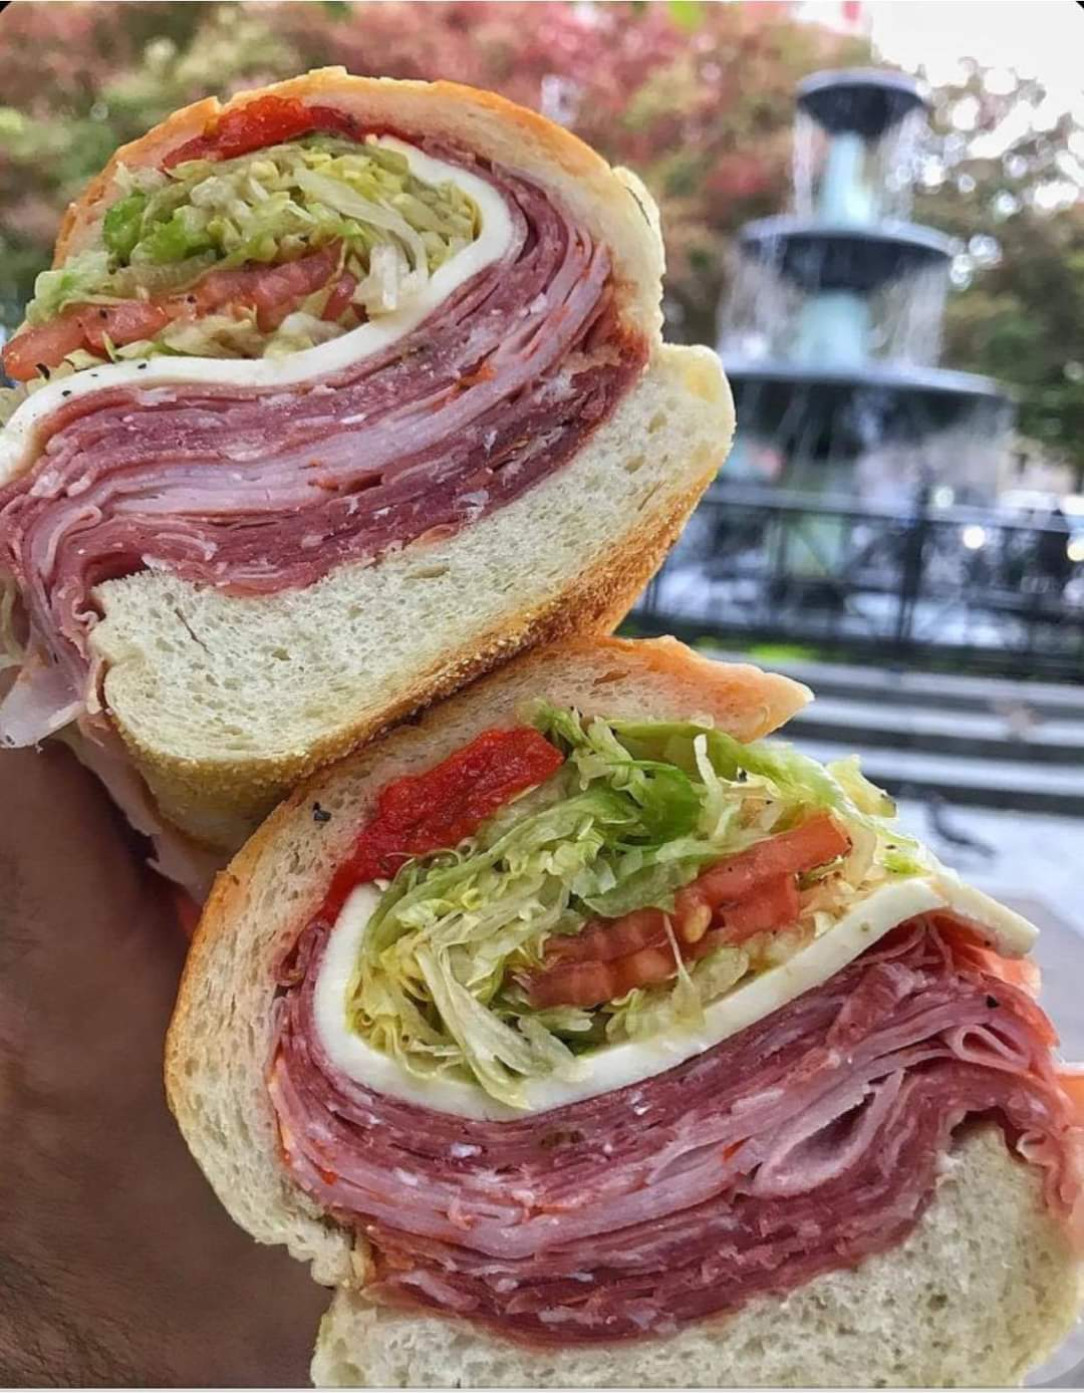 Italian stylesandwich with 3 types of salami and salad